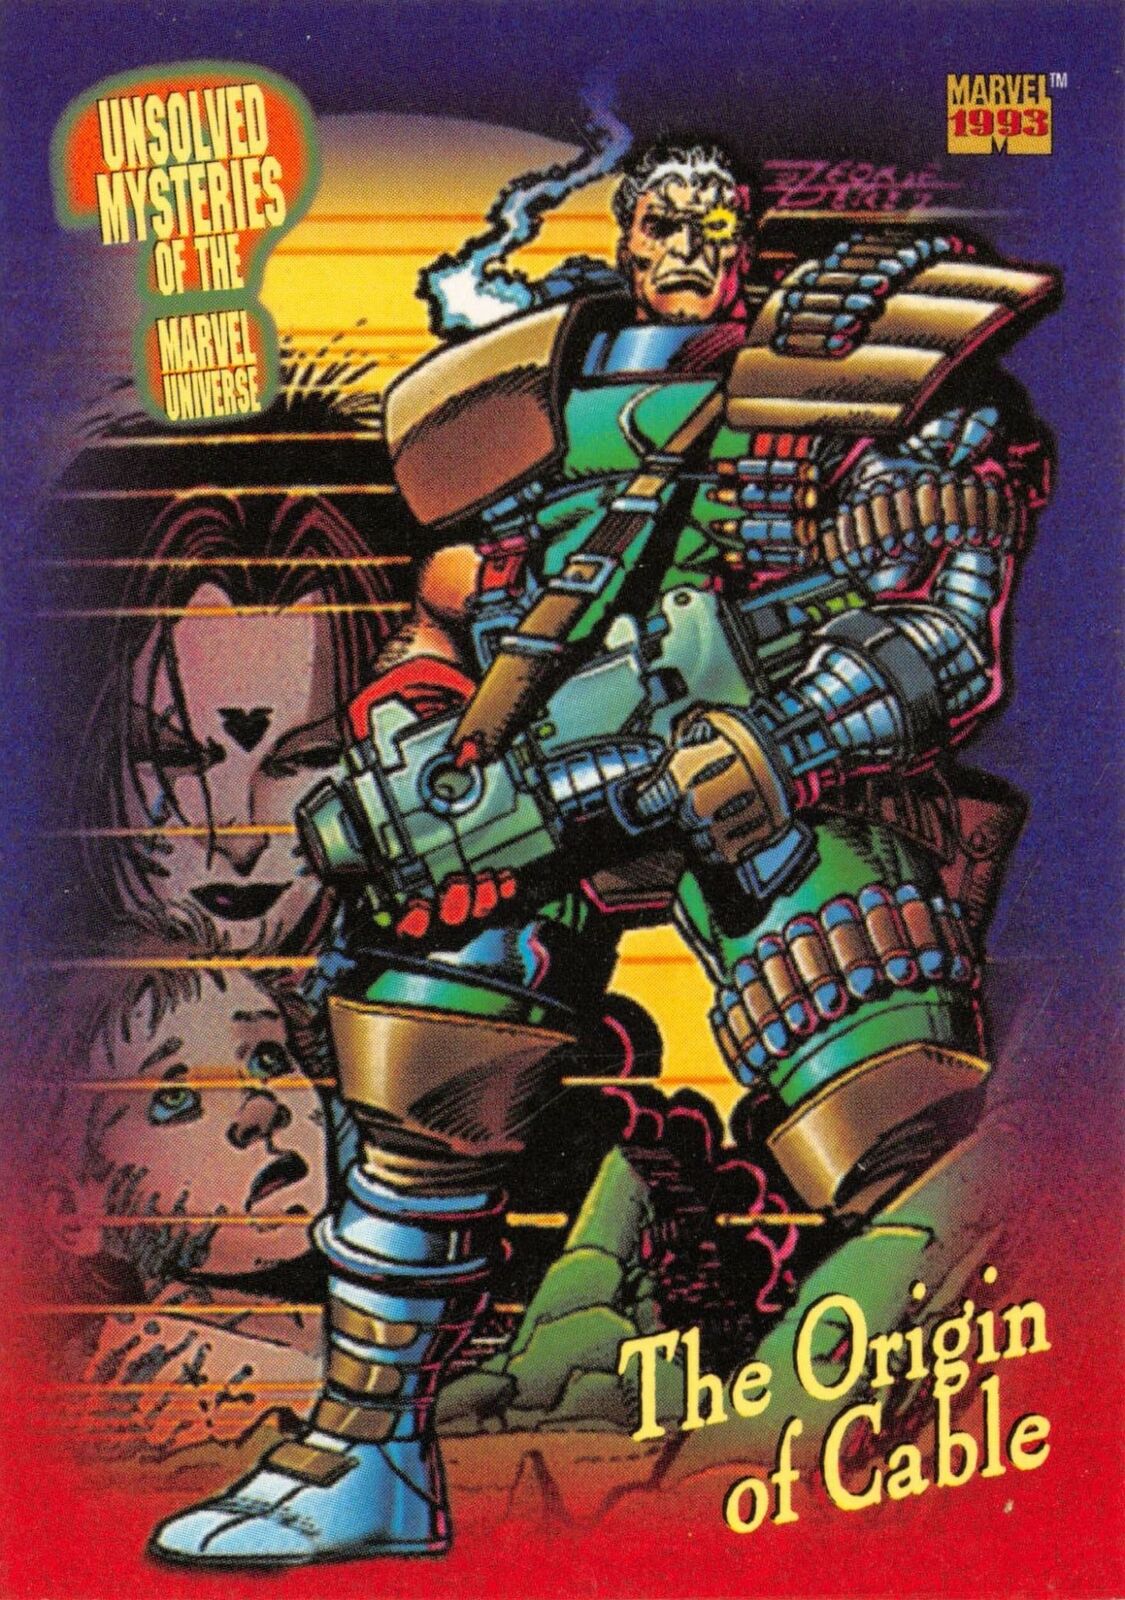 THE ORIGIN OF CABLE / 1993 Marvel Universe Series 4 (SkyBox) BASE Card #137